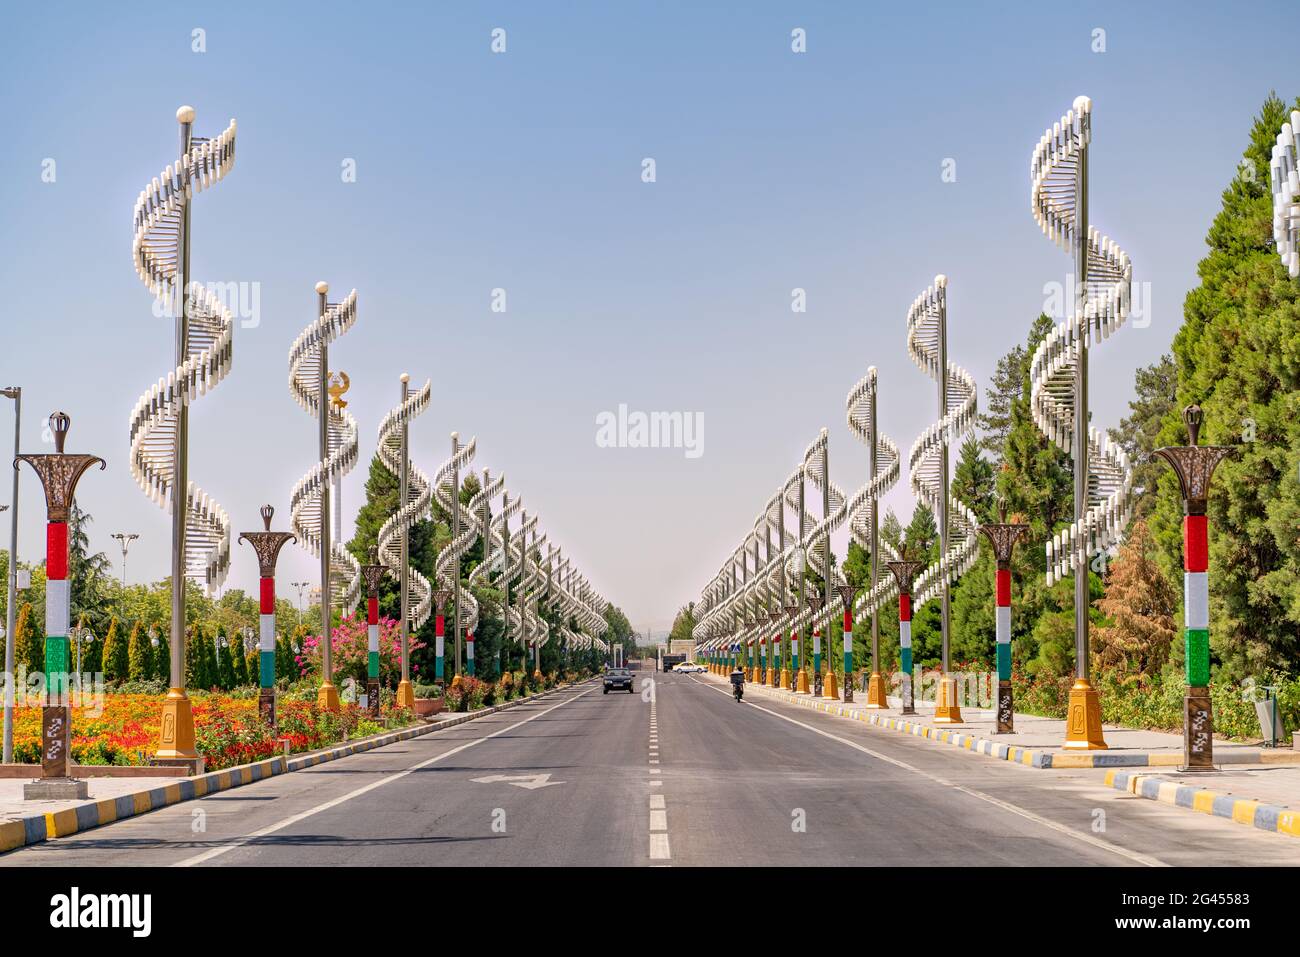 The decorated central road in the capital of Tajikistan - Dushanbe. Stock Photo